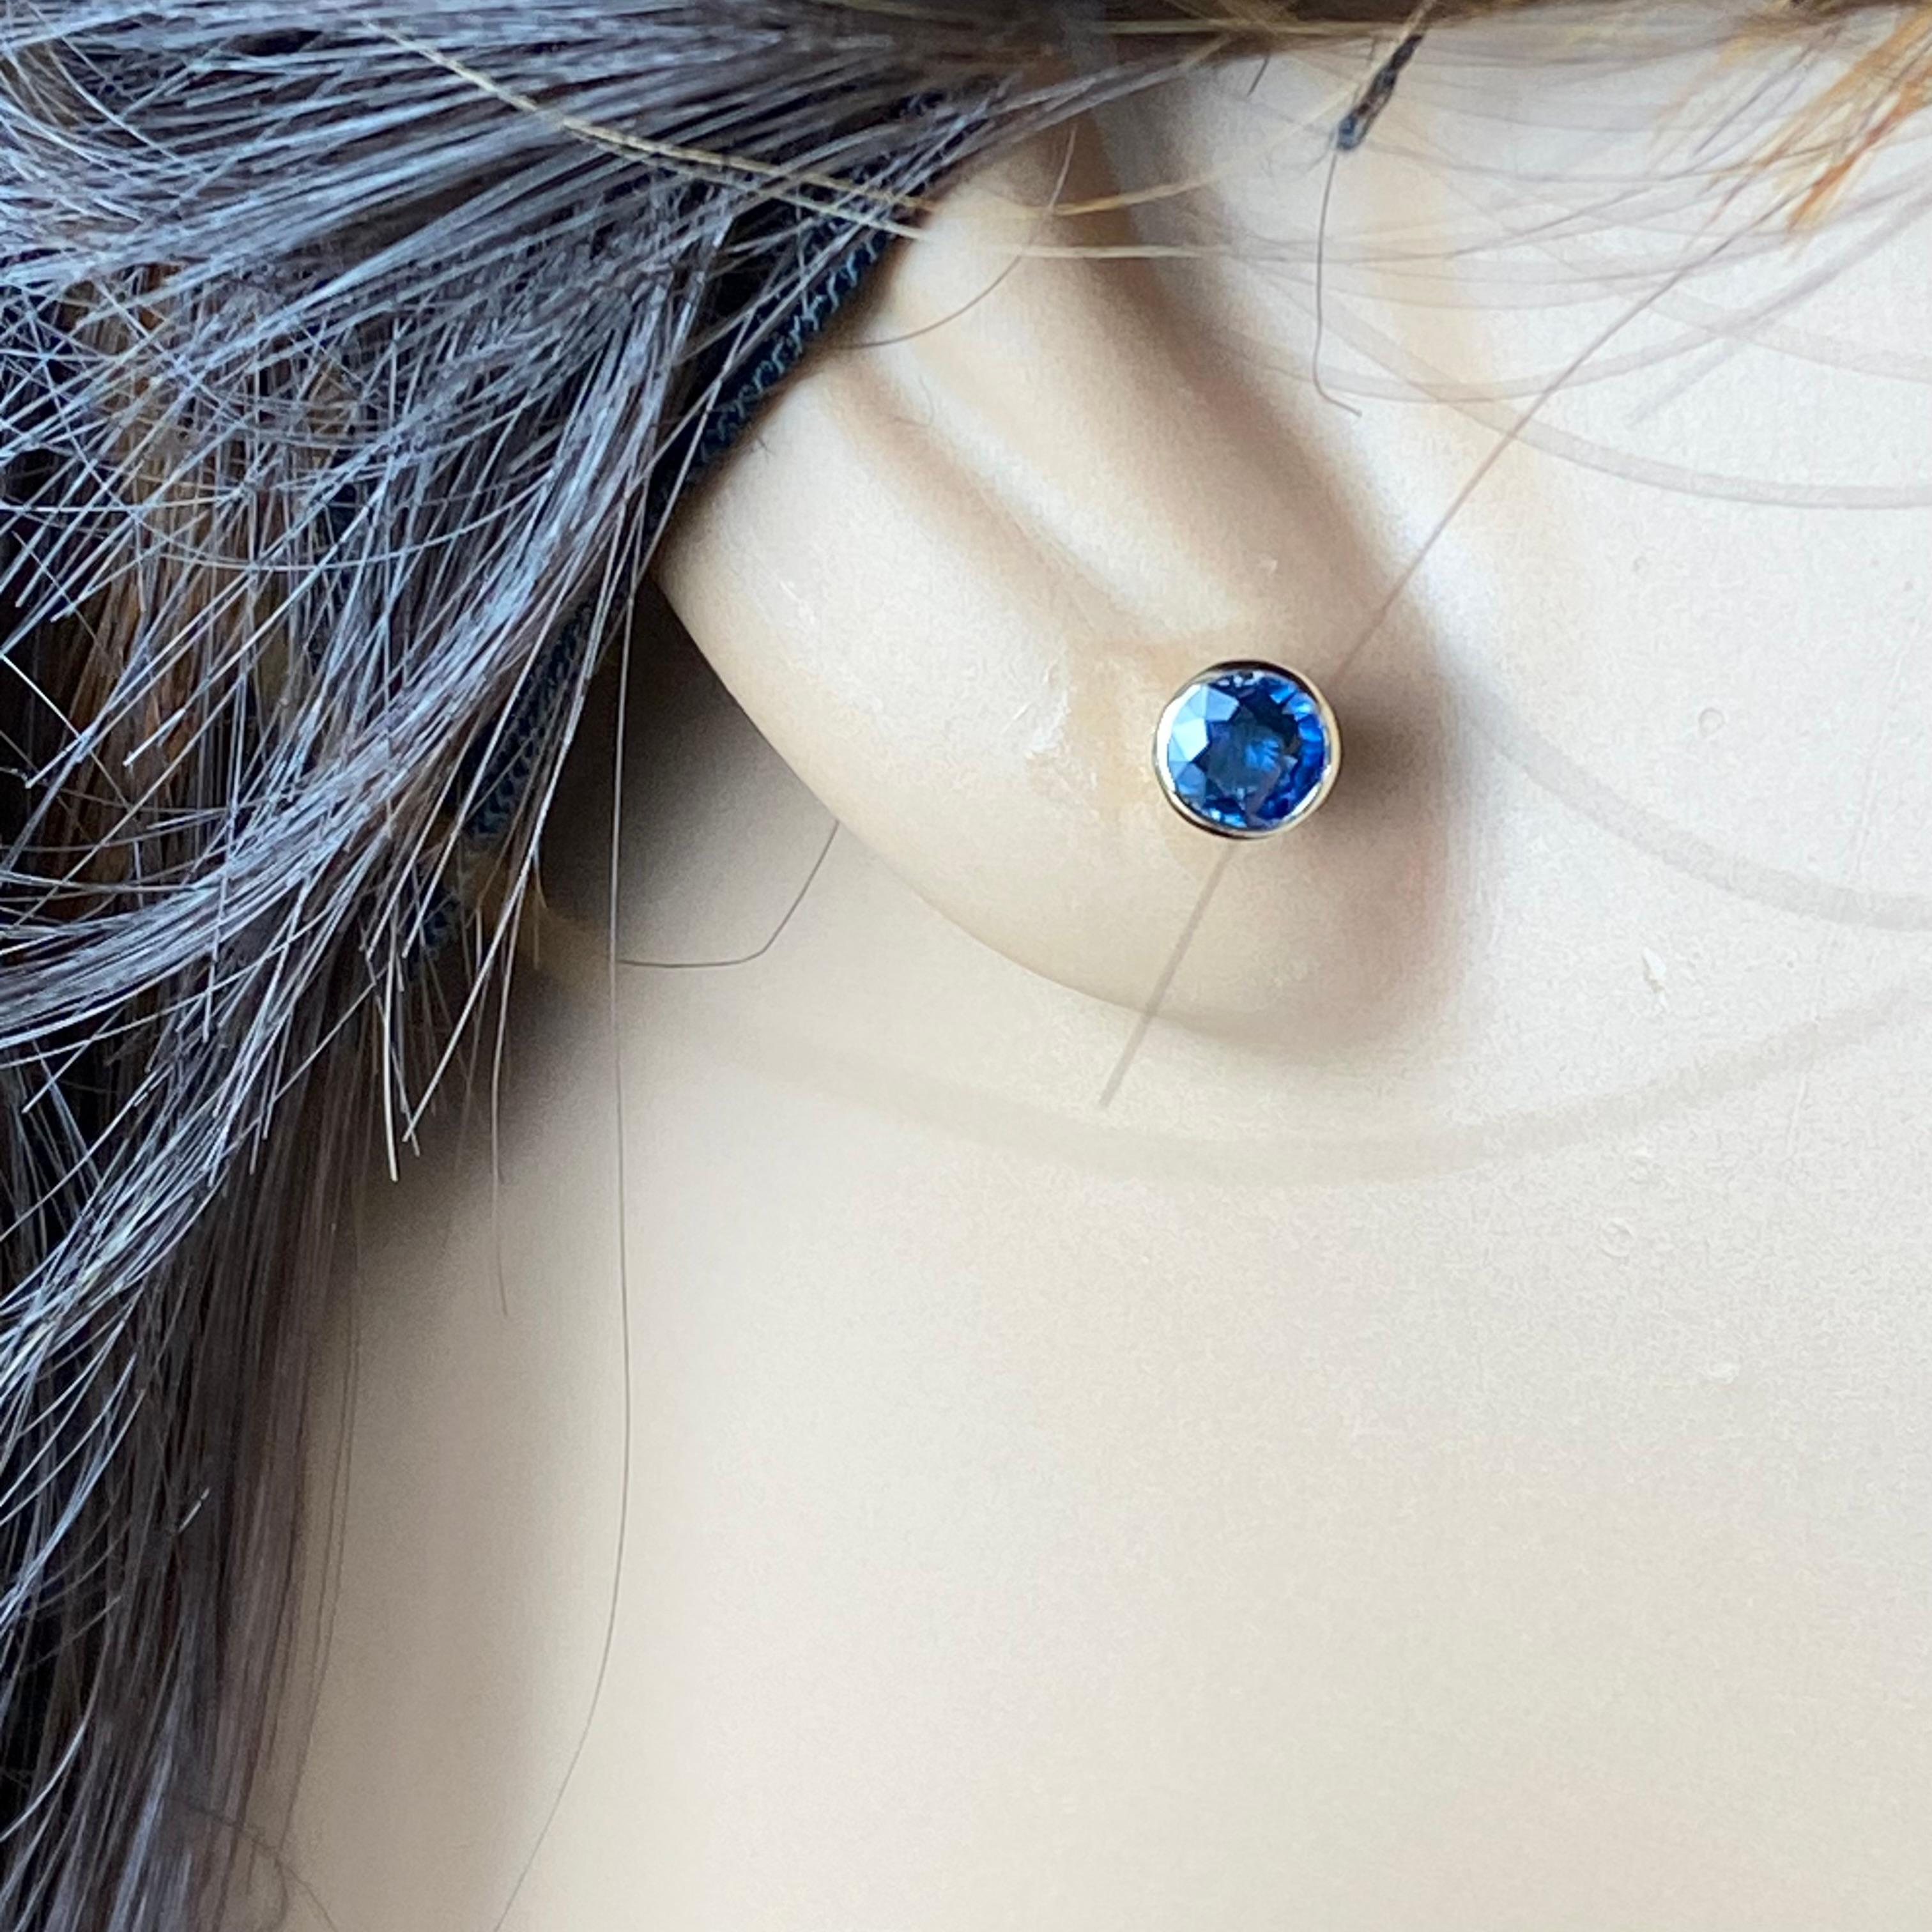 Introducing our exquisite Matched Pair Round Sapphire Stud Earrings, a true embodiment of elegance and sophistication. Crafted with meticulous attention to detail, these earrings are designed to capture hearts and turn heads.
The star of these